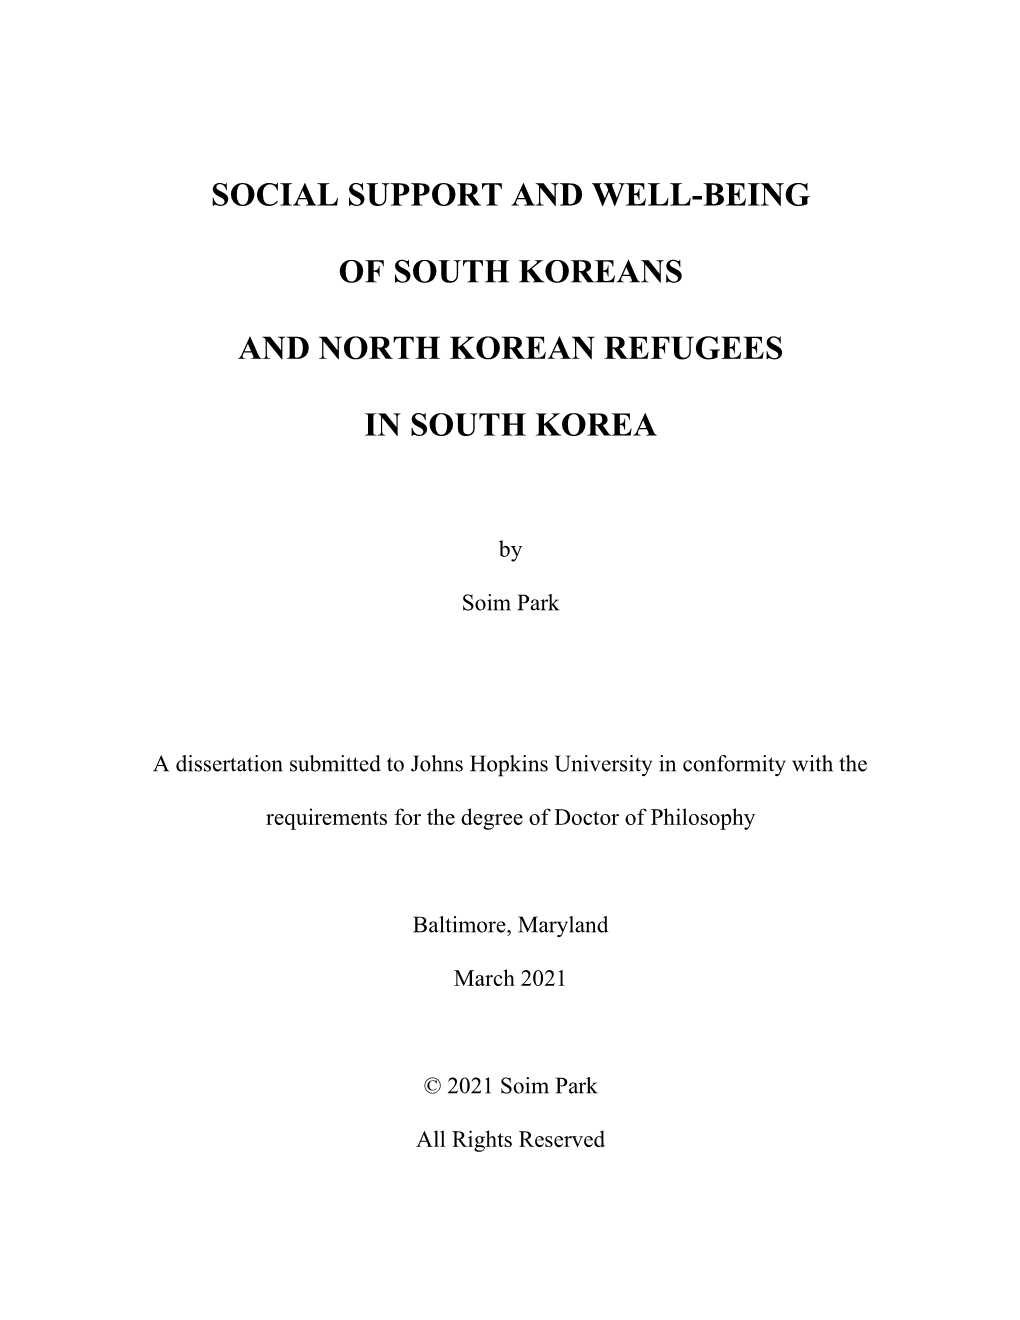 Social Support and Well-Being of South